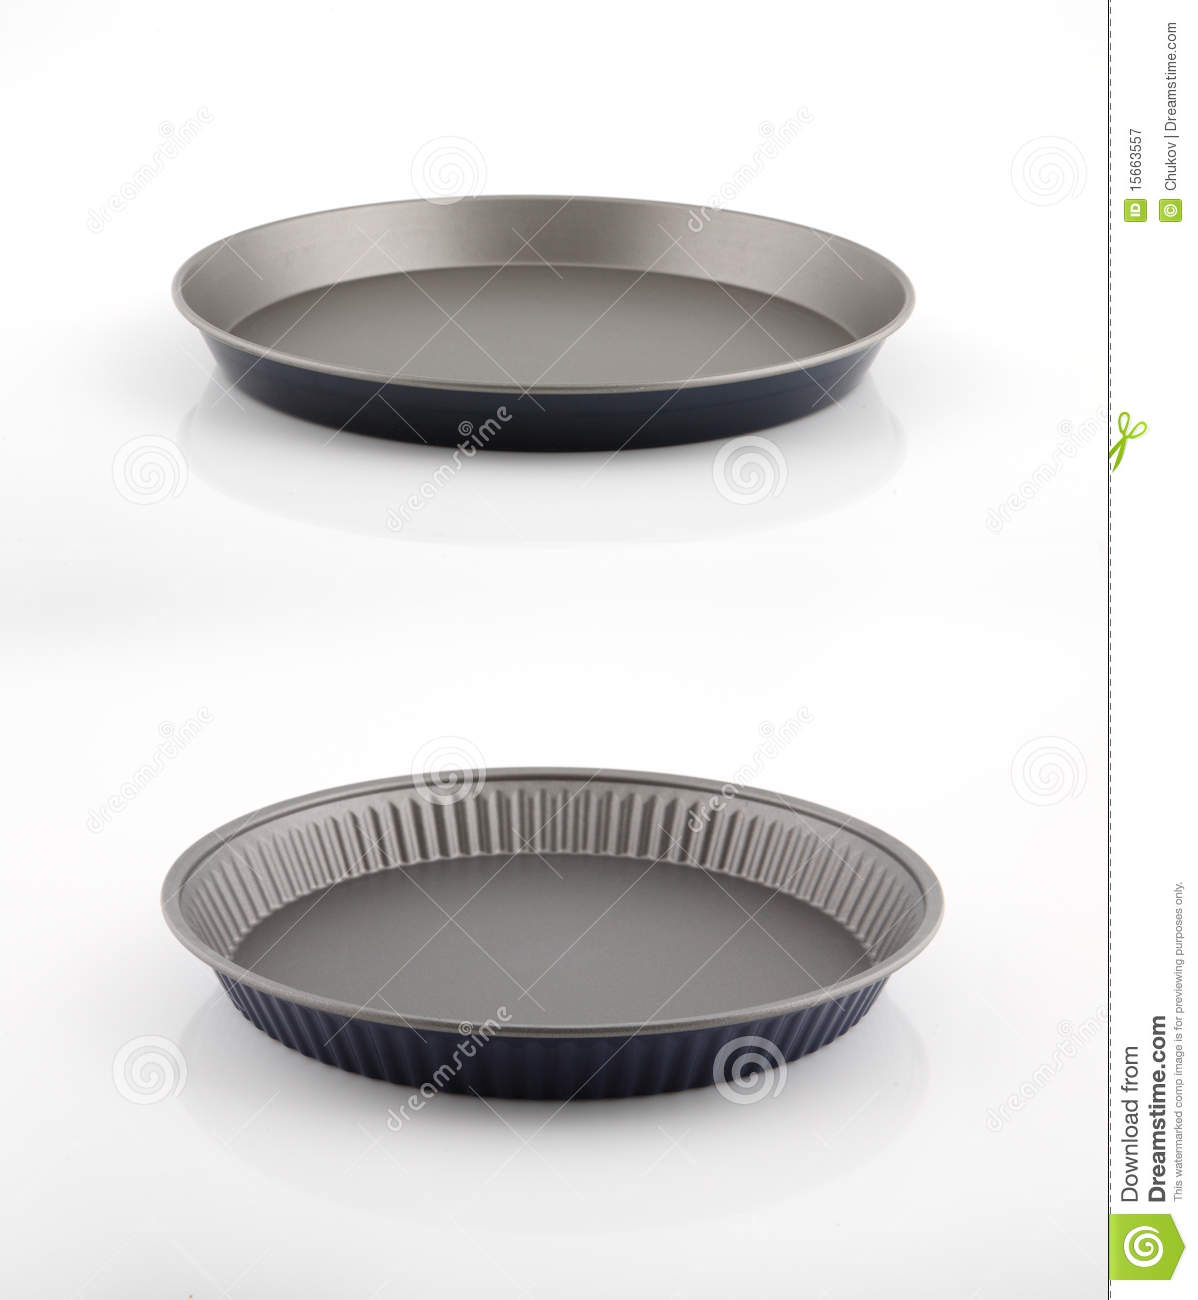 Brand New Baking Tin  Isolated On White Royalty Free Stock Photography